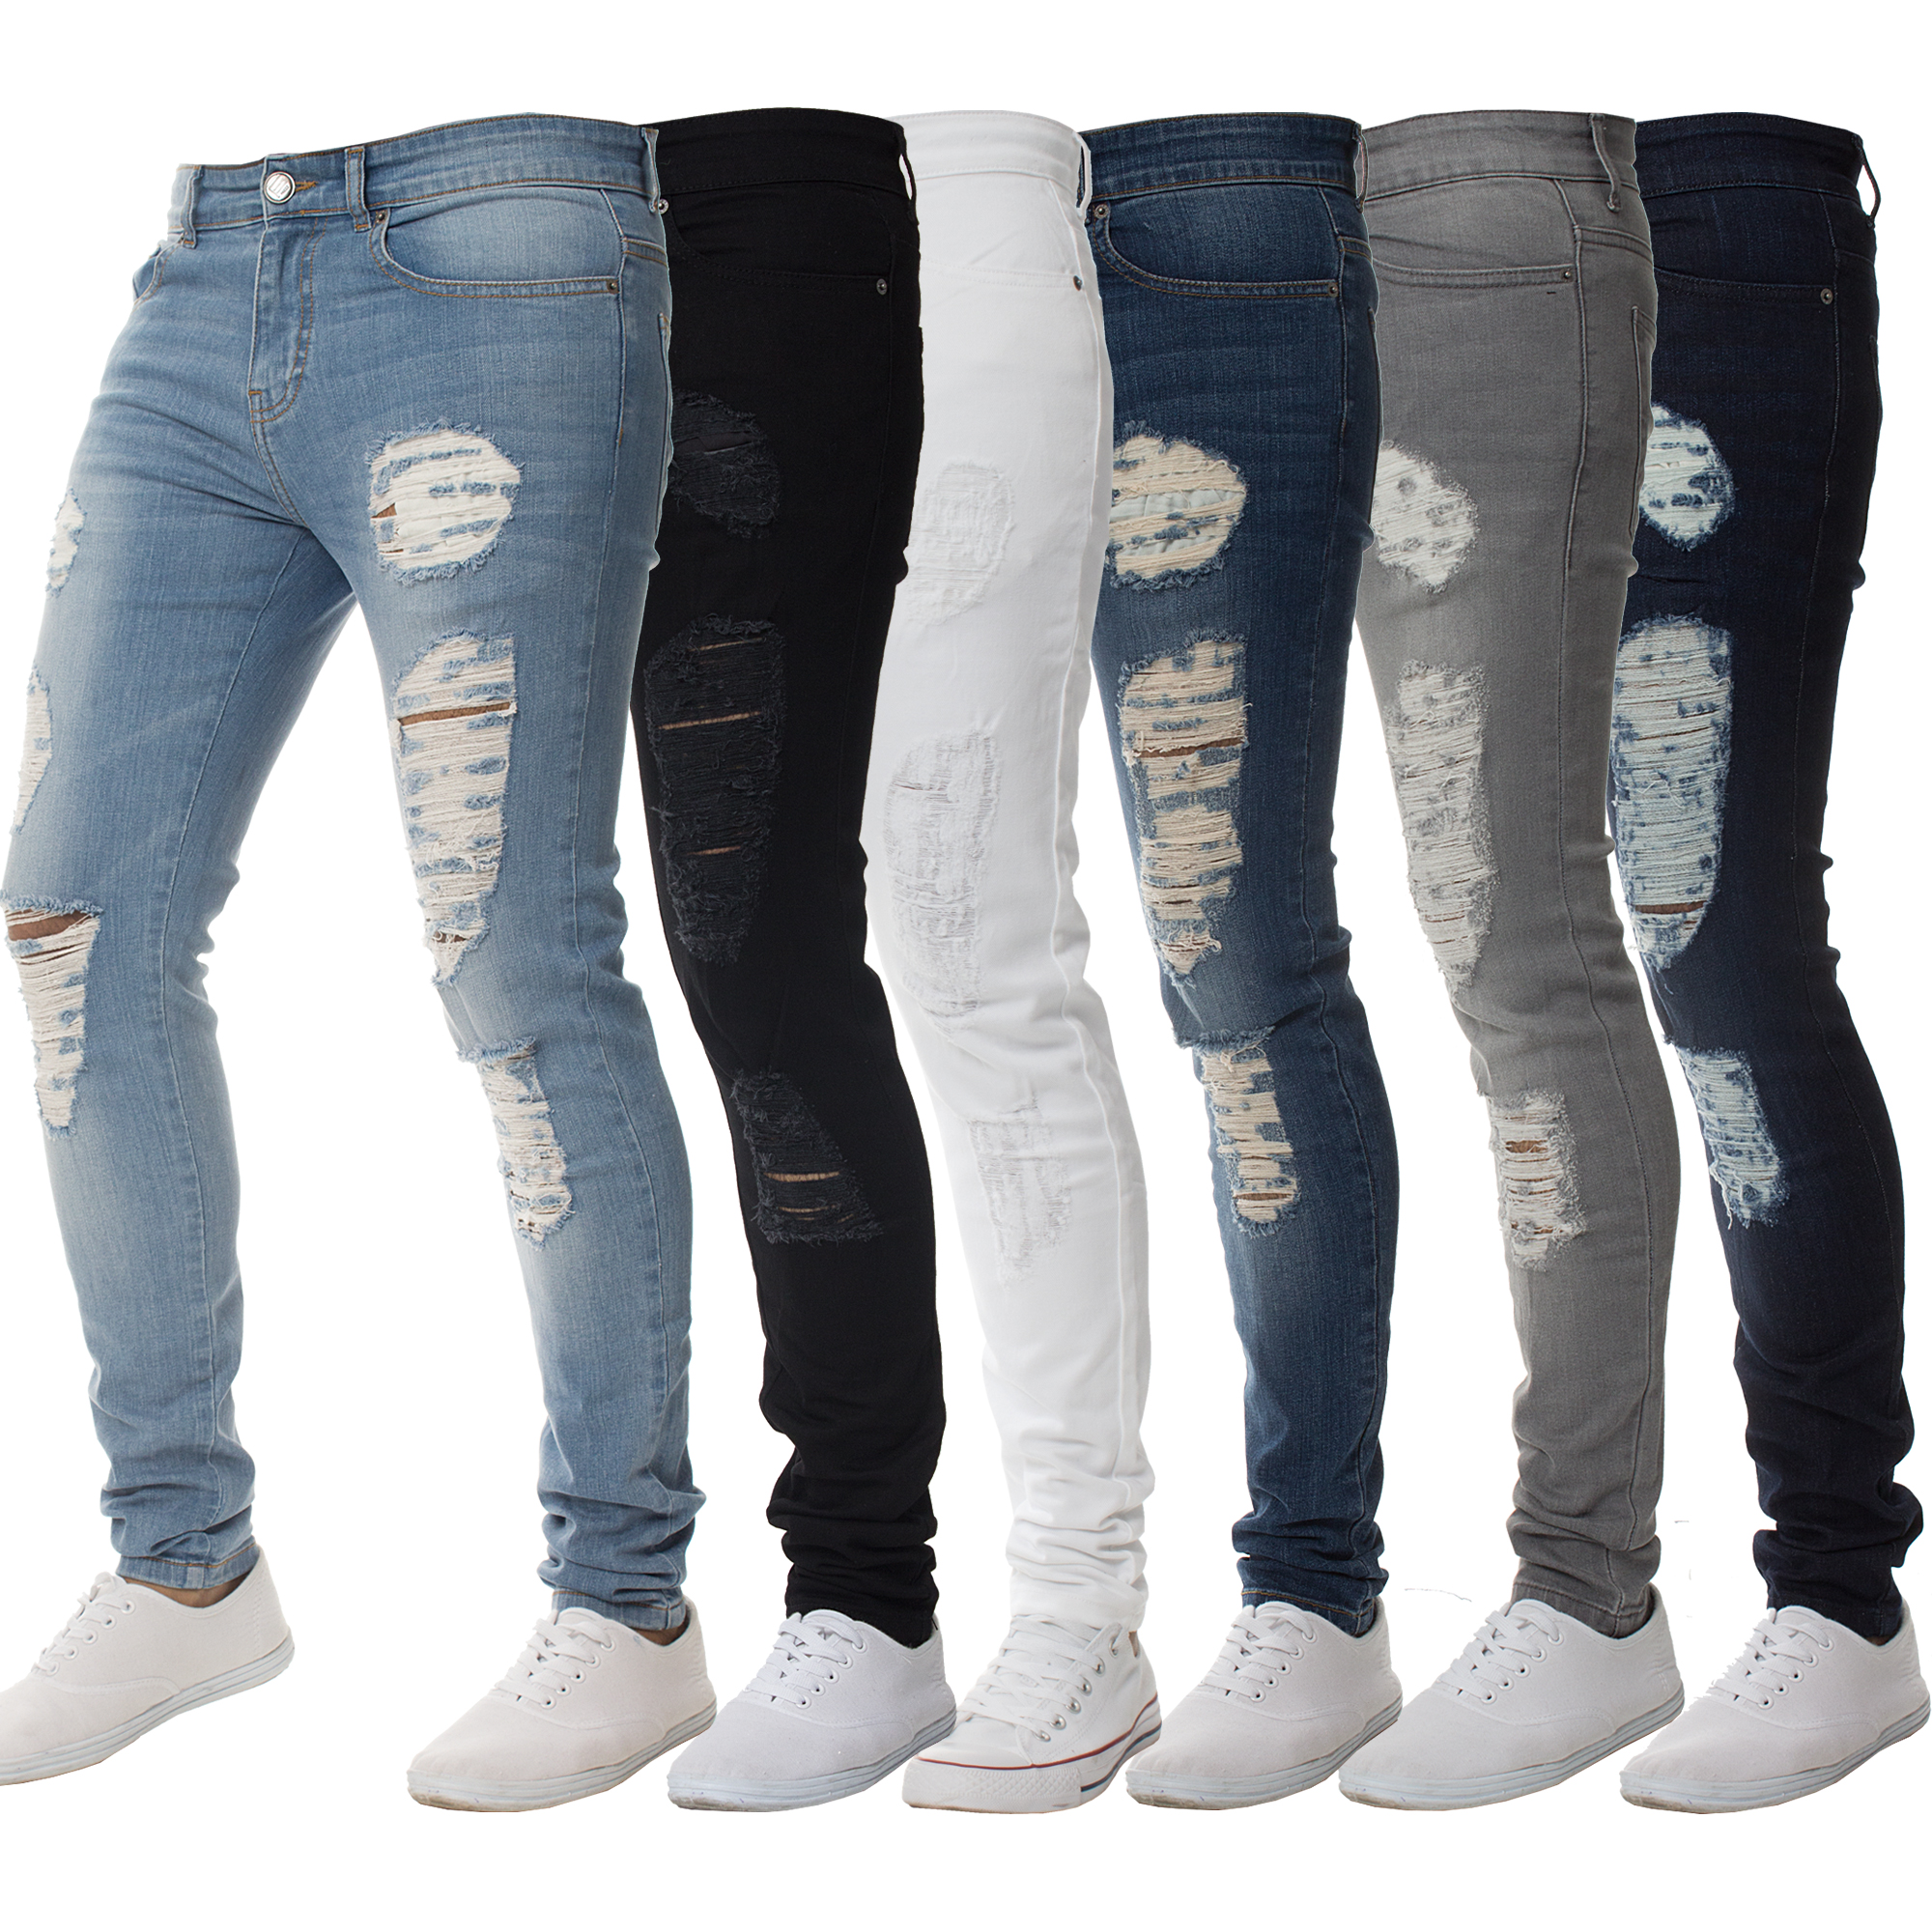 New ENZO Designer Mens Super Stretch Skinny Jeans Ripped Distressed ...